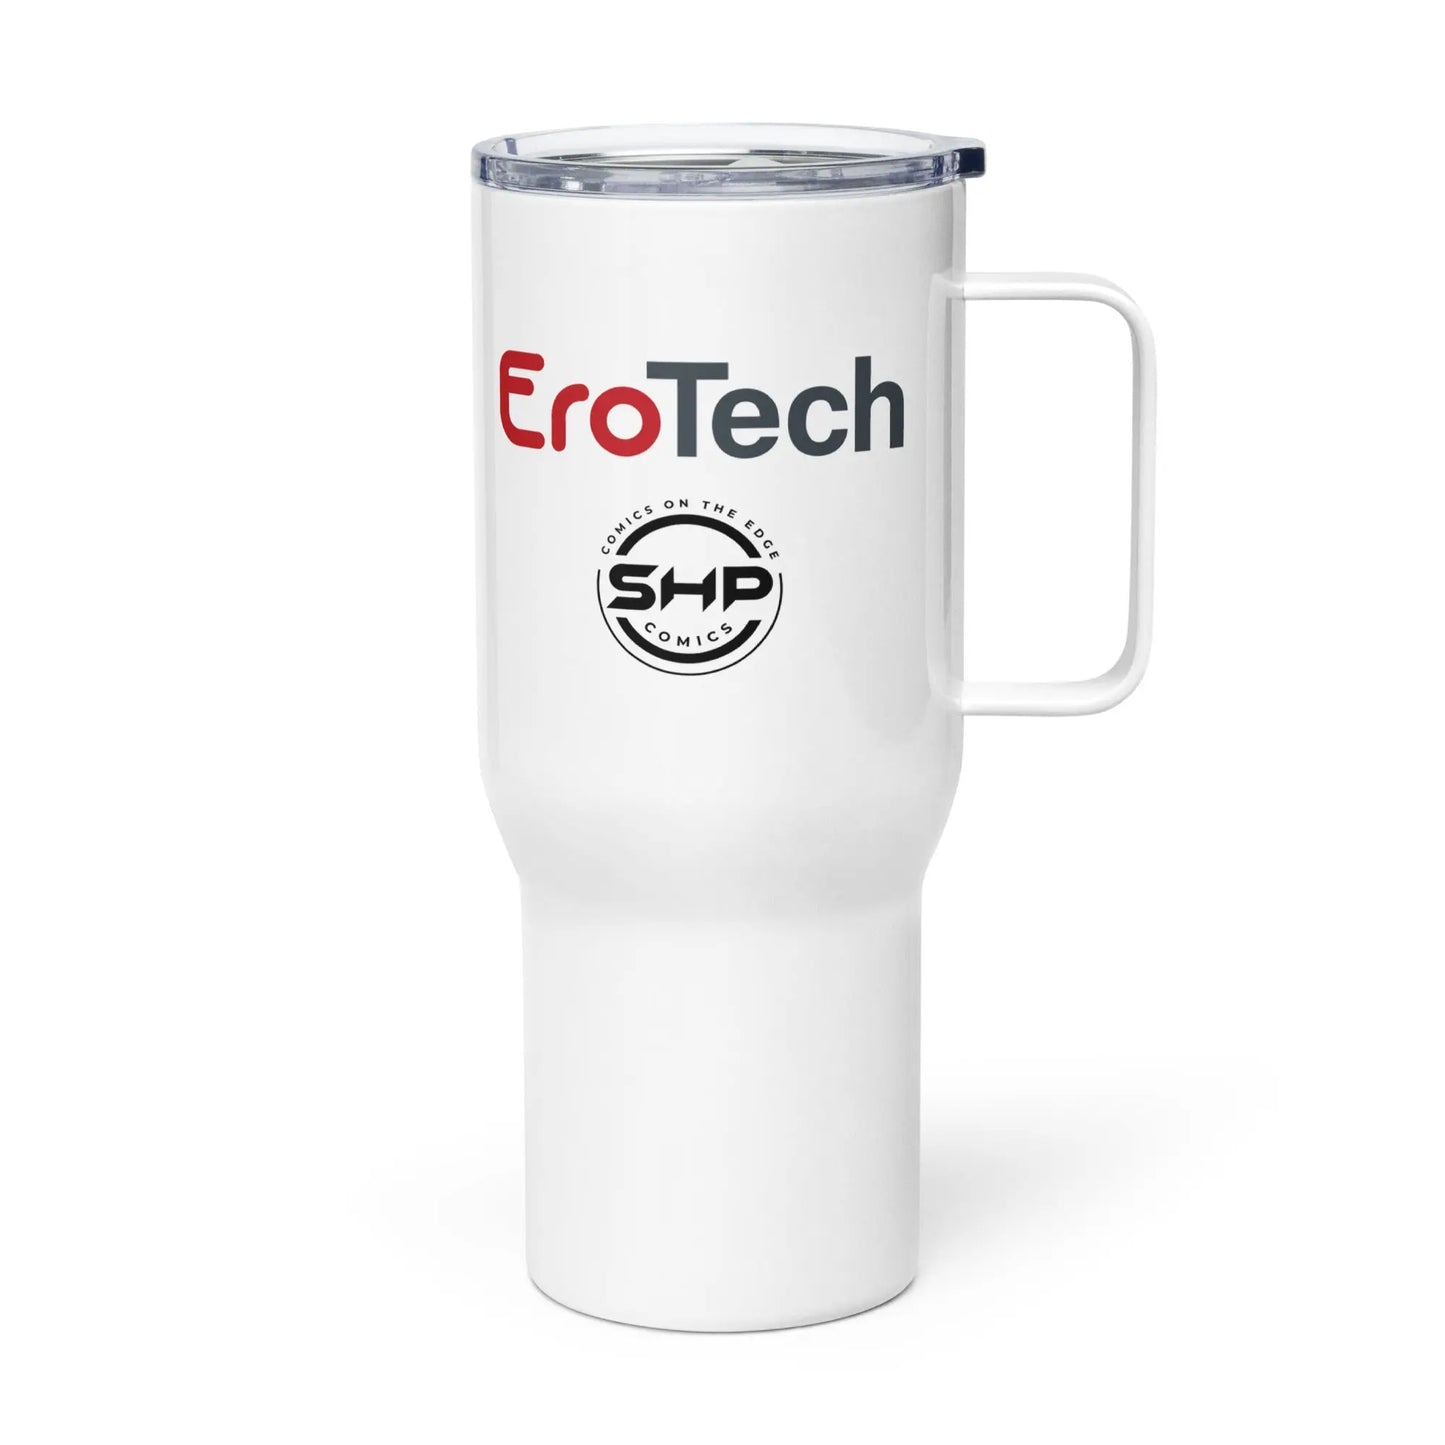 EroTech Obey Me! Irresistible Travel mug with a handle SHP Comics